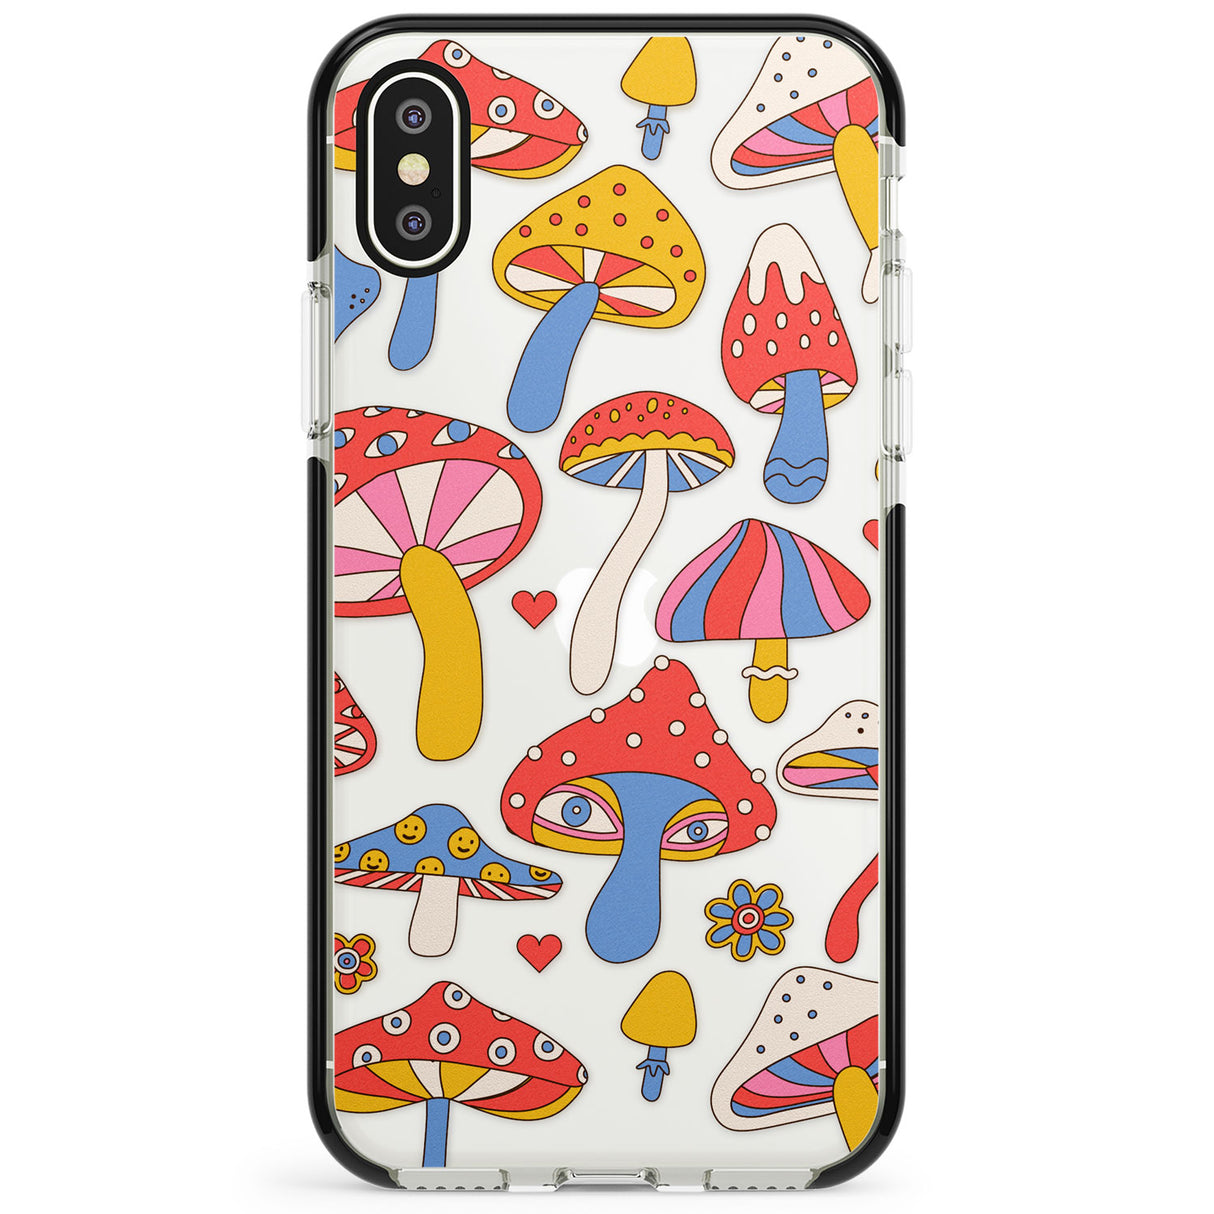 Vibrant Shrooms Phone Case for iPhone X XS Max XR